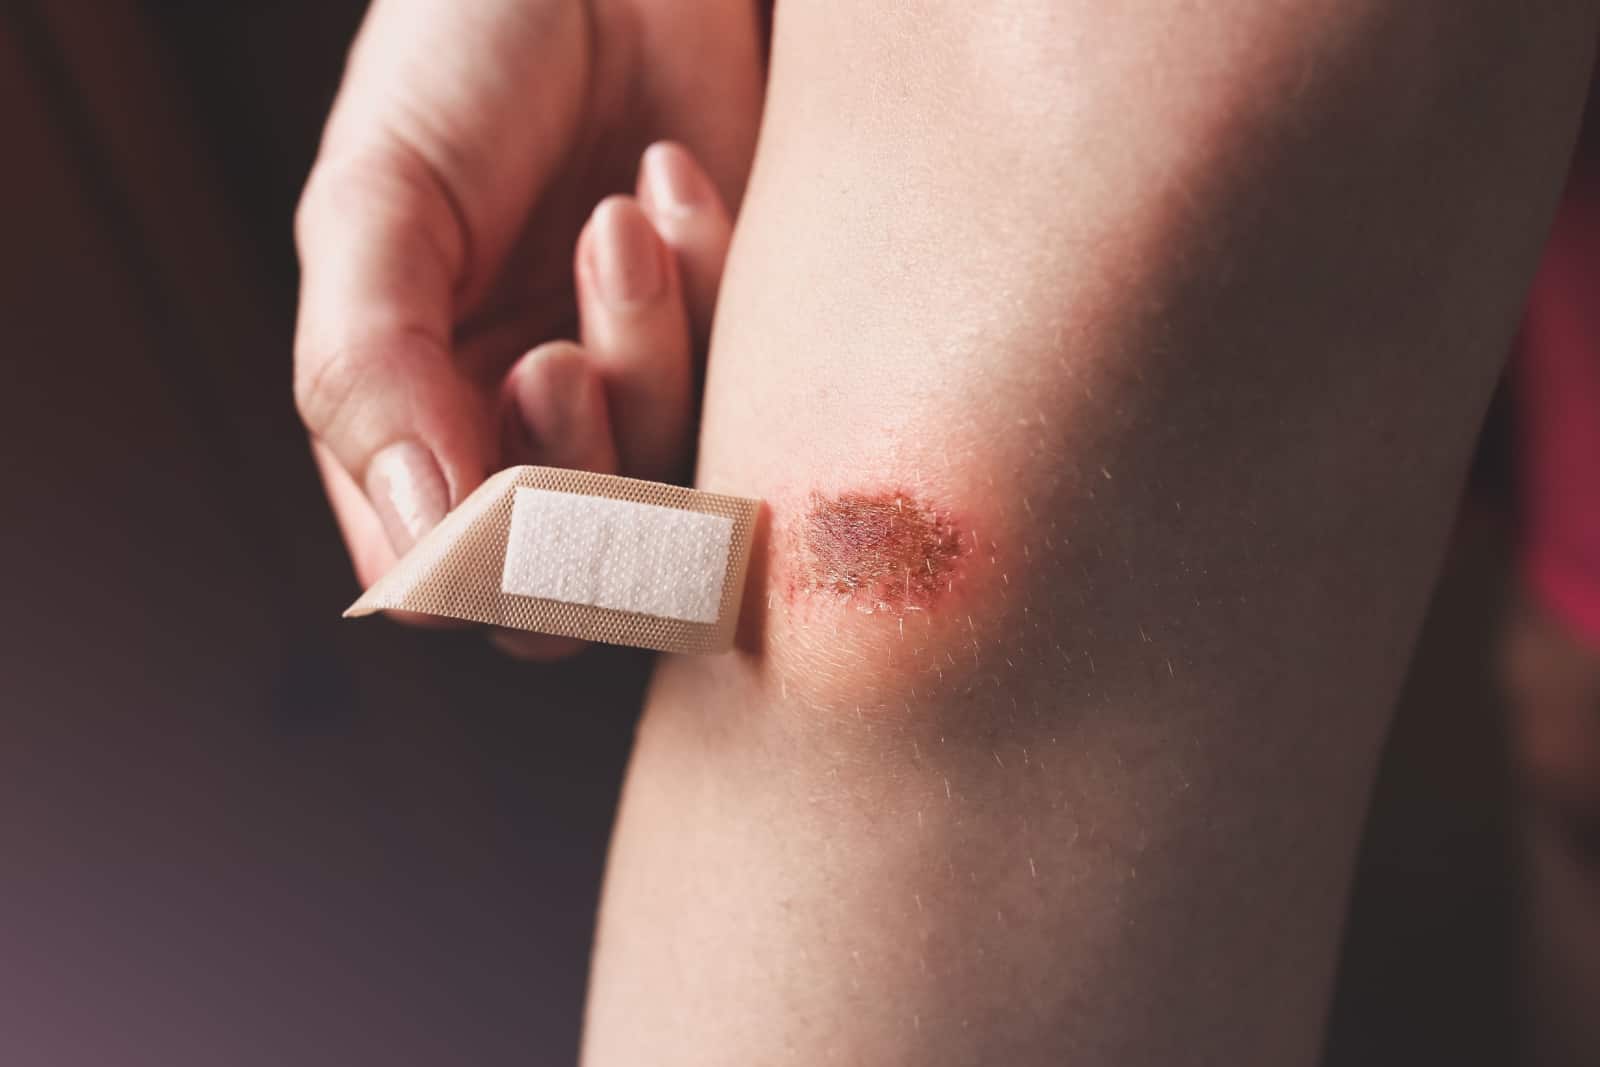 Girl is applying antiseptic band-aid plaster on the injured leg